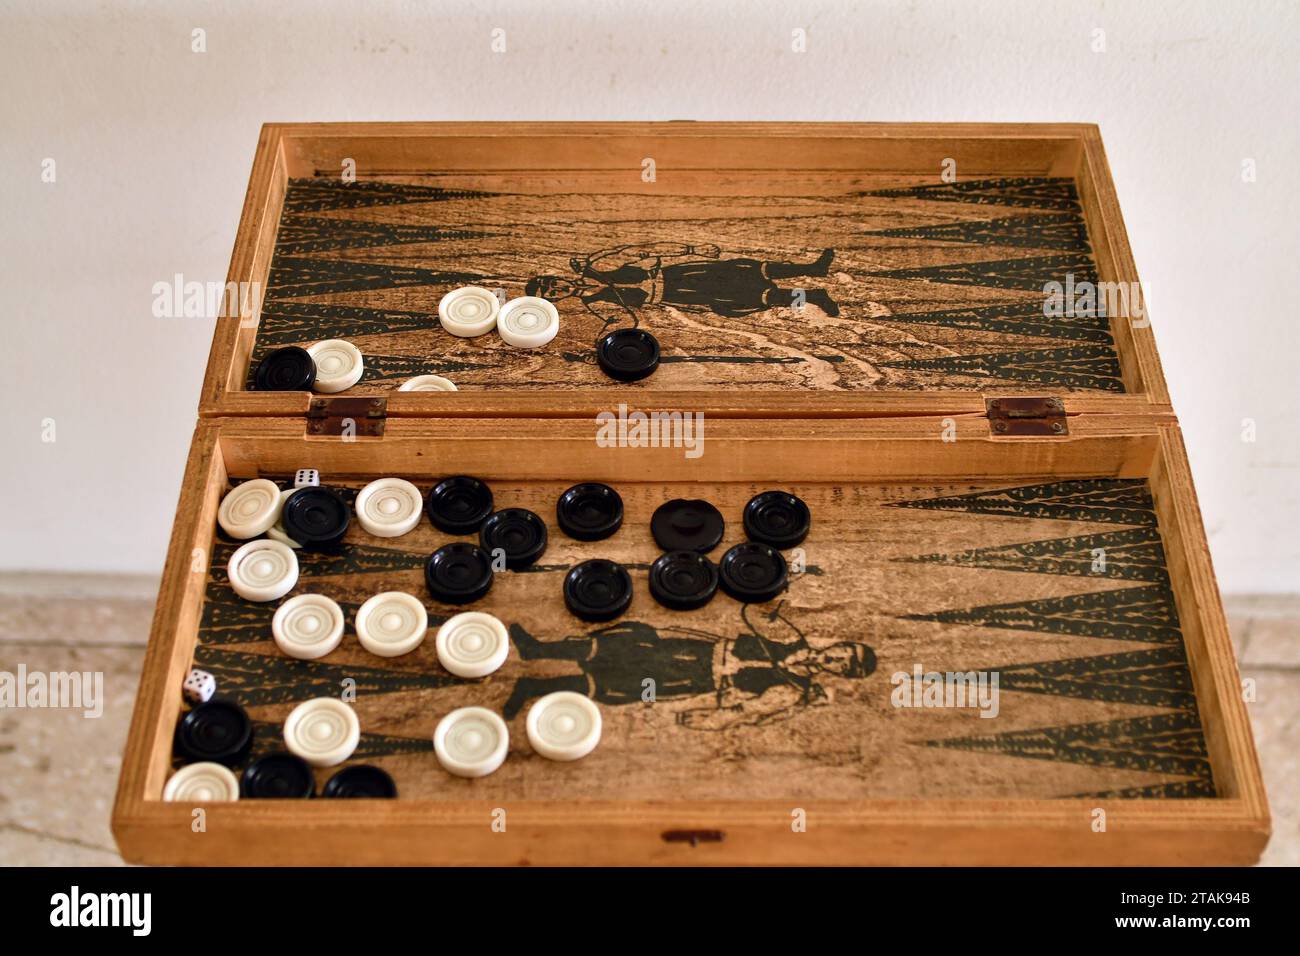 Cyprus, Tavli - a board game similar to backgammon that is very common in Greece, Cyprus and Turkey Stock Photo